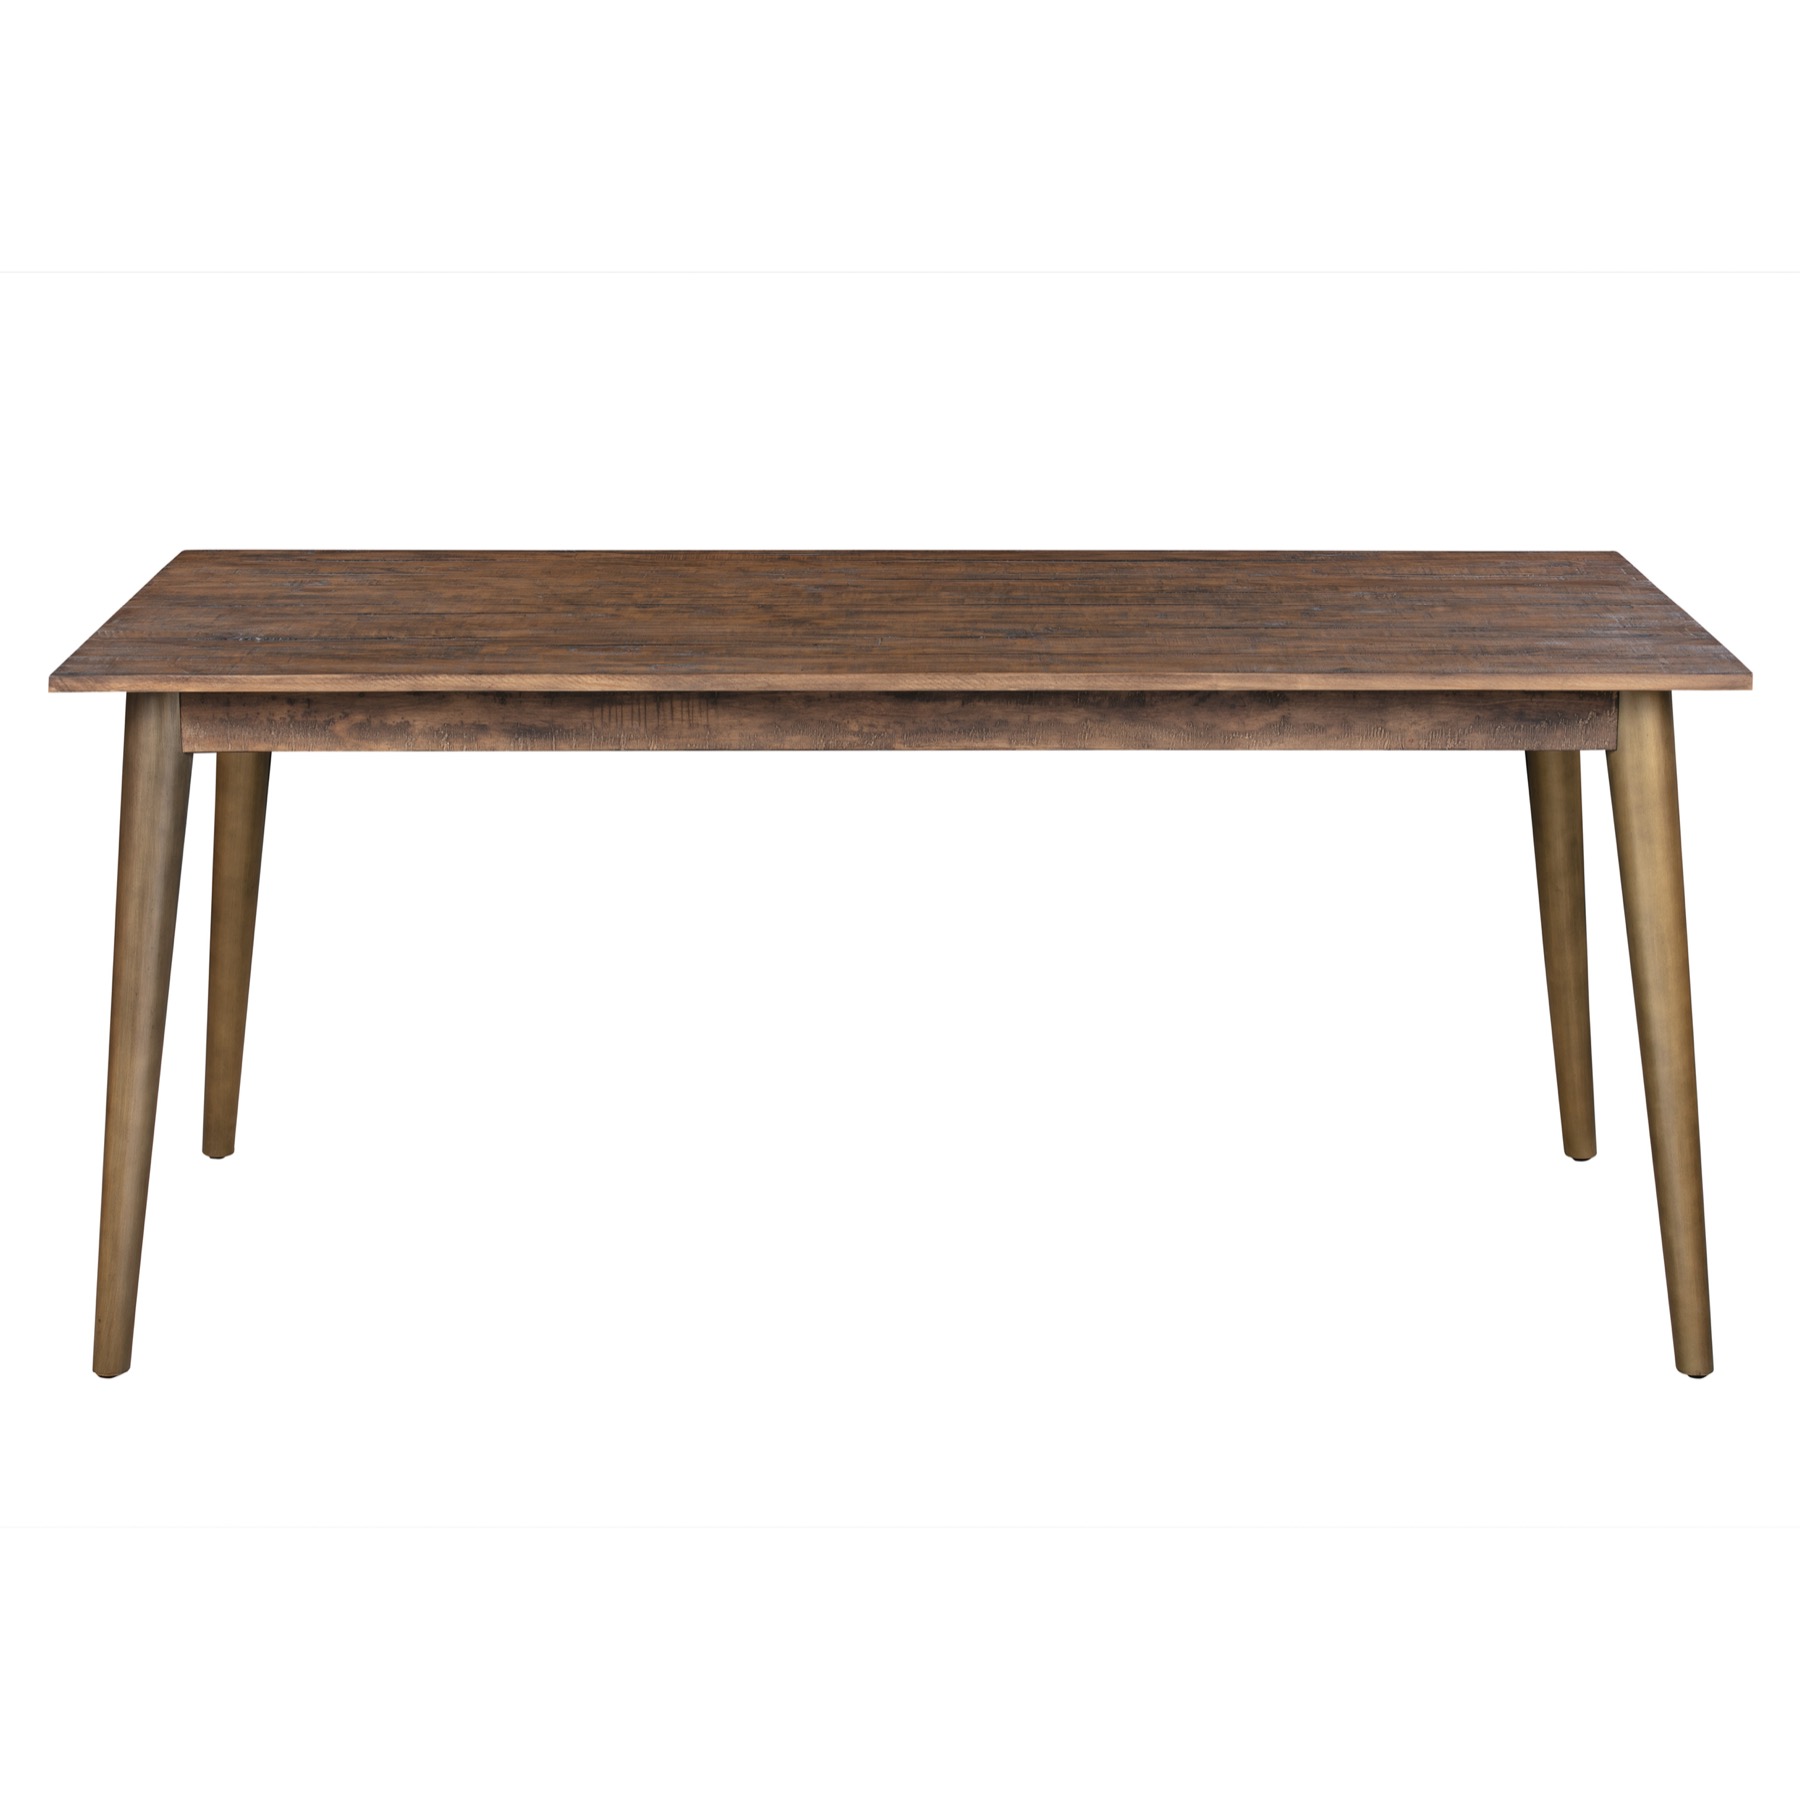 Havana Gold Dining Table - Image 2